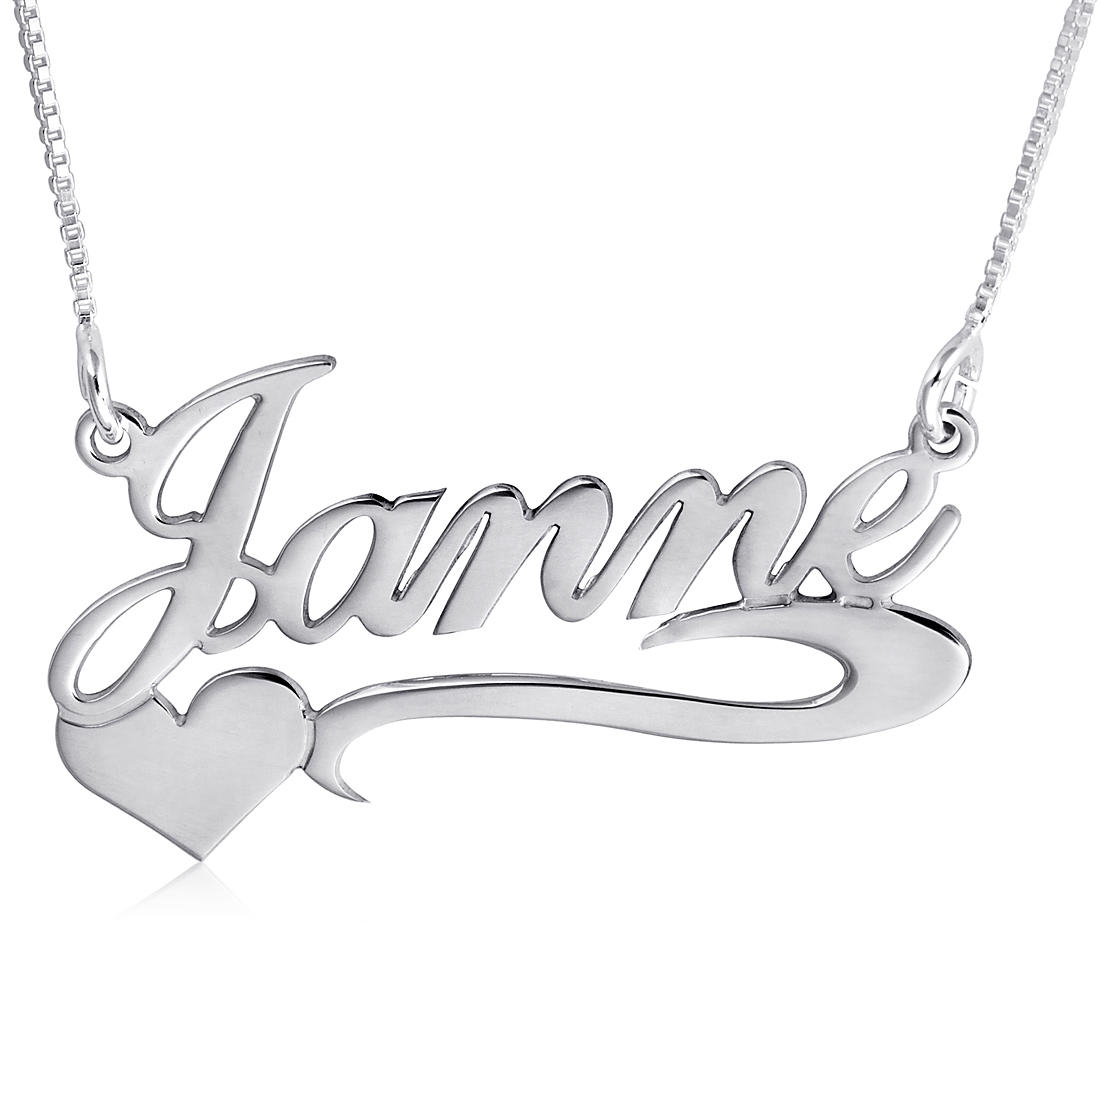 14K White Gold Heart Name Necklace, Swoosh - 1